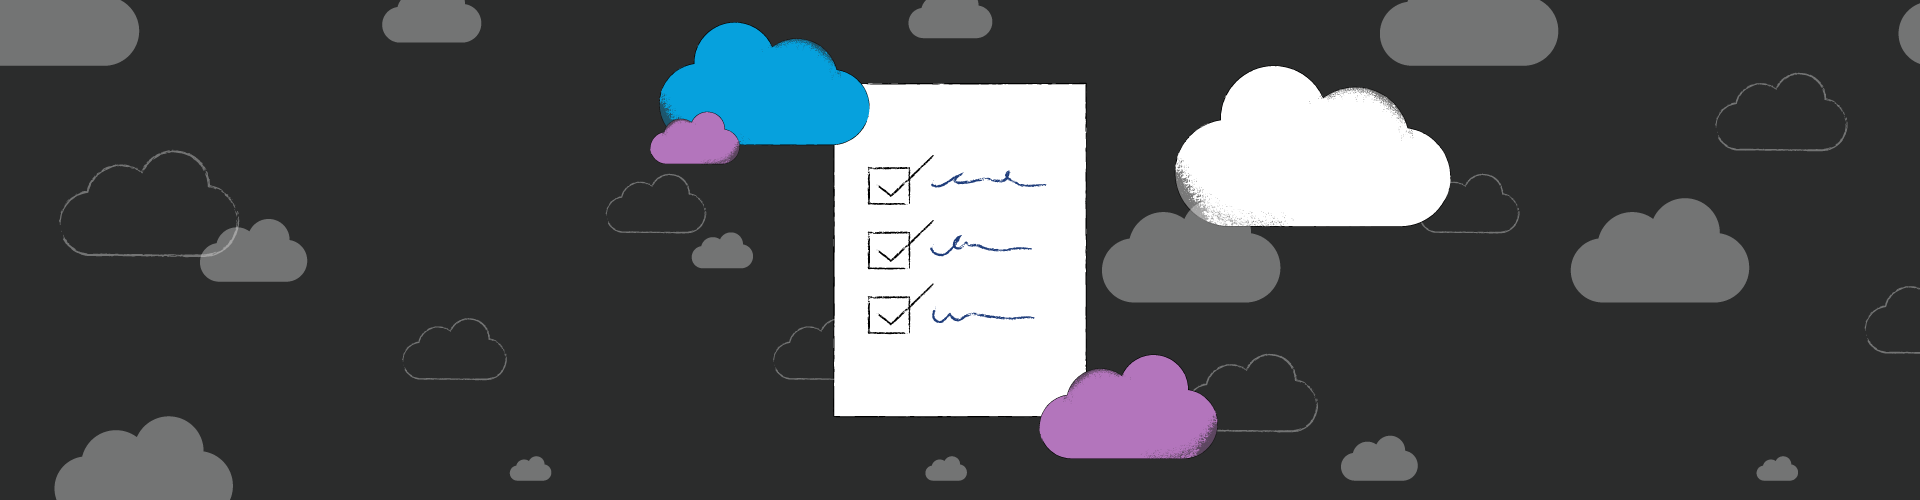 Cloud Migration Assessment – A Guide to Evaluating Your Workloads for a Cloud Environment